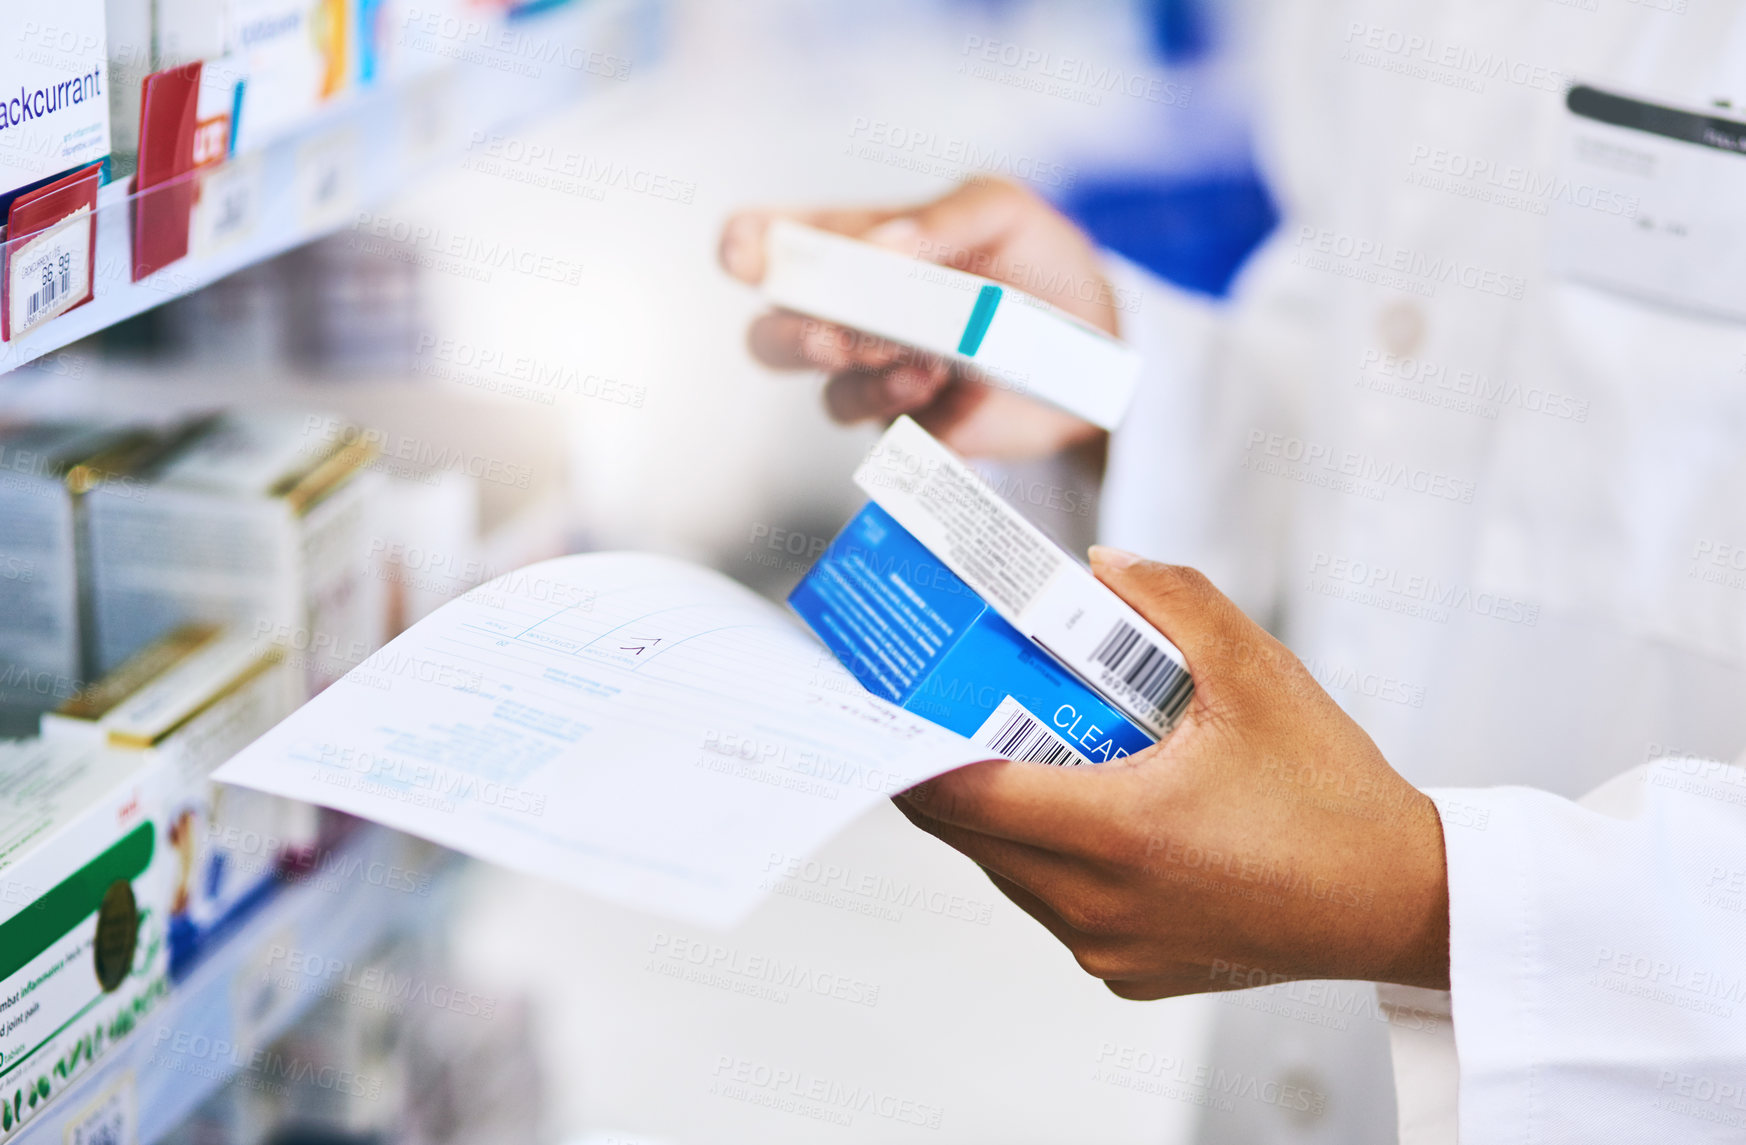 Buy stock photo Cropped shot of a pharmacist filling a prescription